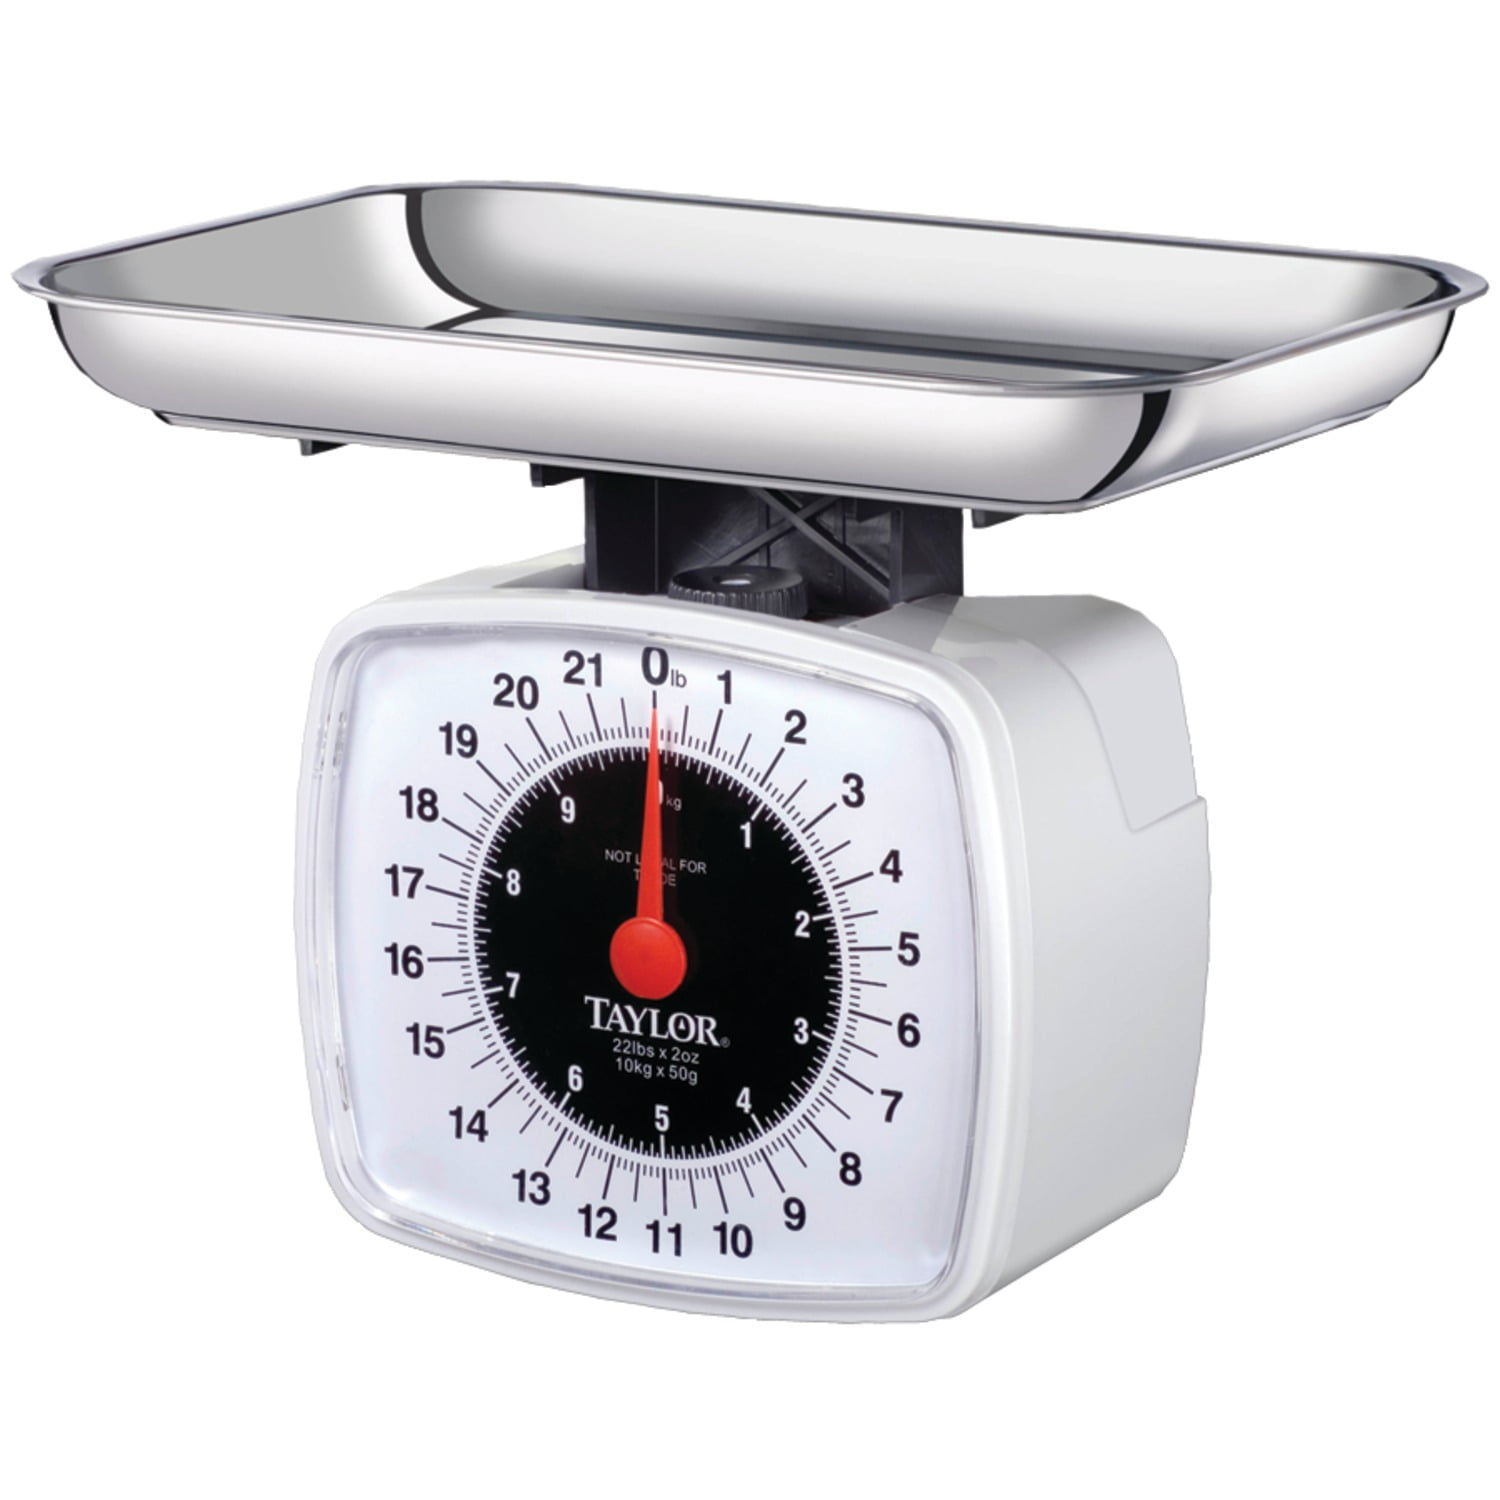 Food Kitchen Scale Buy at Best Price- 5 Core